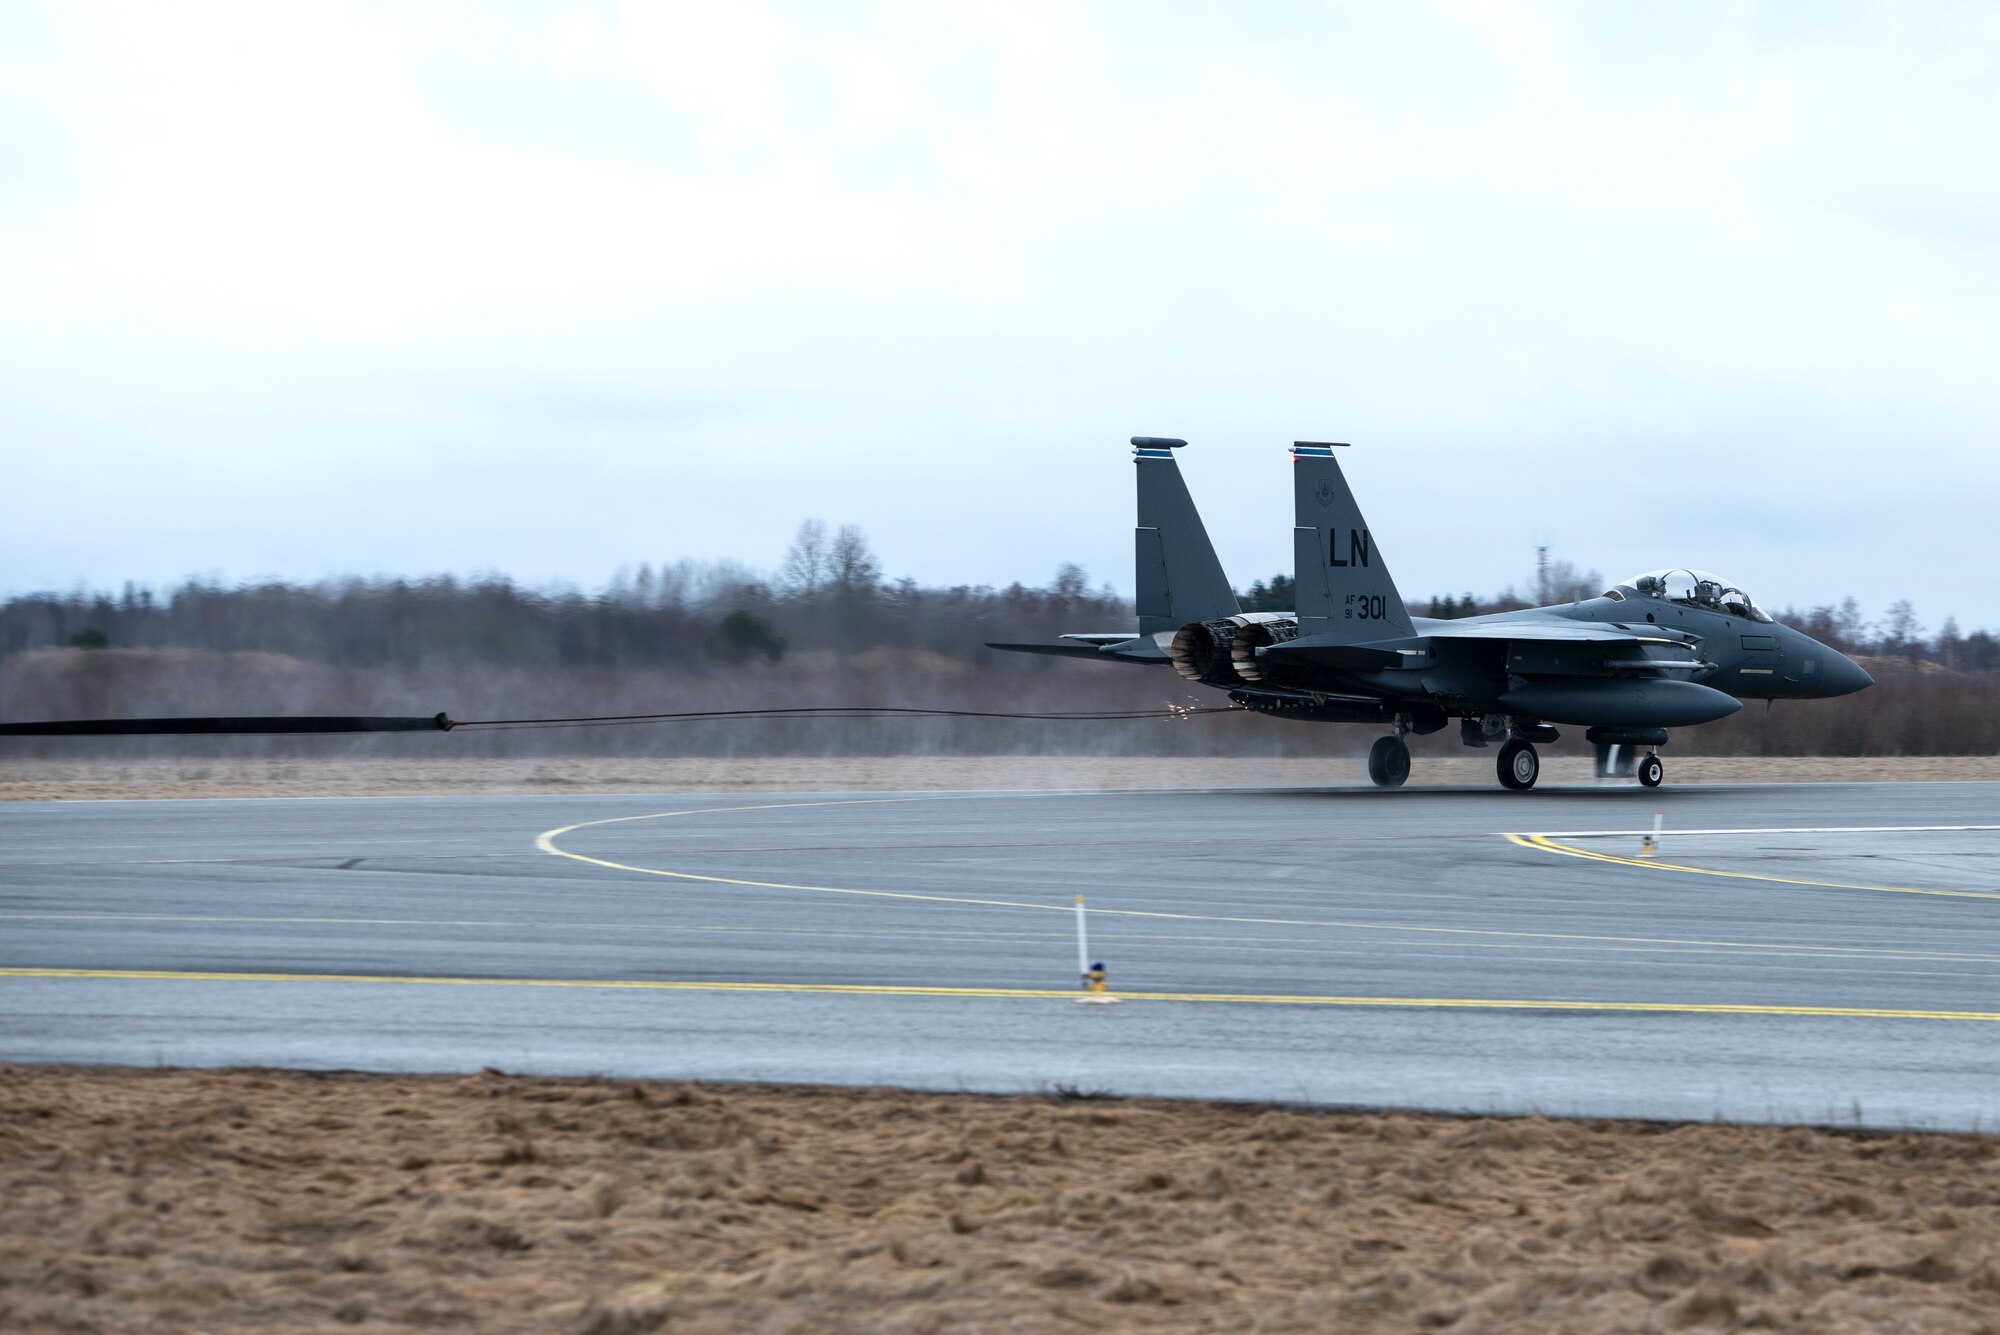 An F-15E Strike Eagle assigned to the 492nd Fighter Squadron catches the cable of an aircraft arresting system during a Barrier Arresting Kit certification at Ämari Air Base, Estonia, March 17, 2021. An aircraft arresting system is in place to bring aircraft to a safe stop in the event of an emergency that would prevent the aircraft from performing a standard landing. (U.S. Air Force photo by Airman 1st Class Jessi Monte)